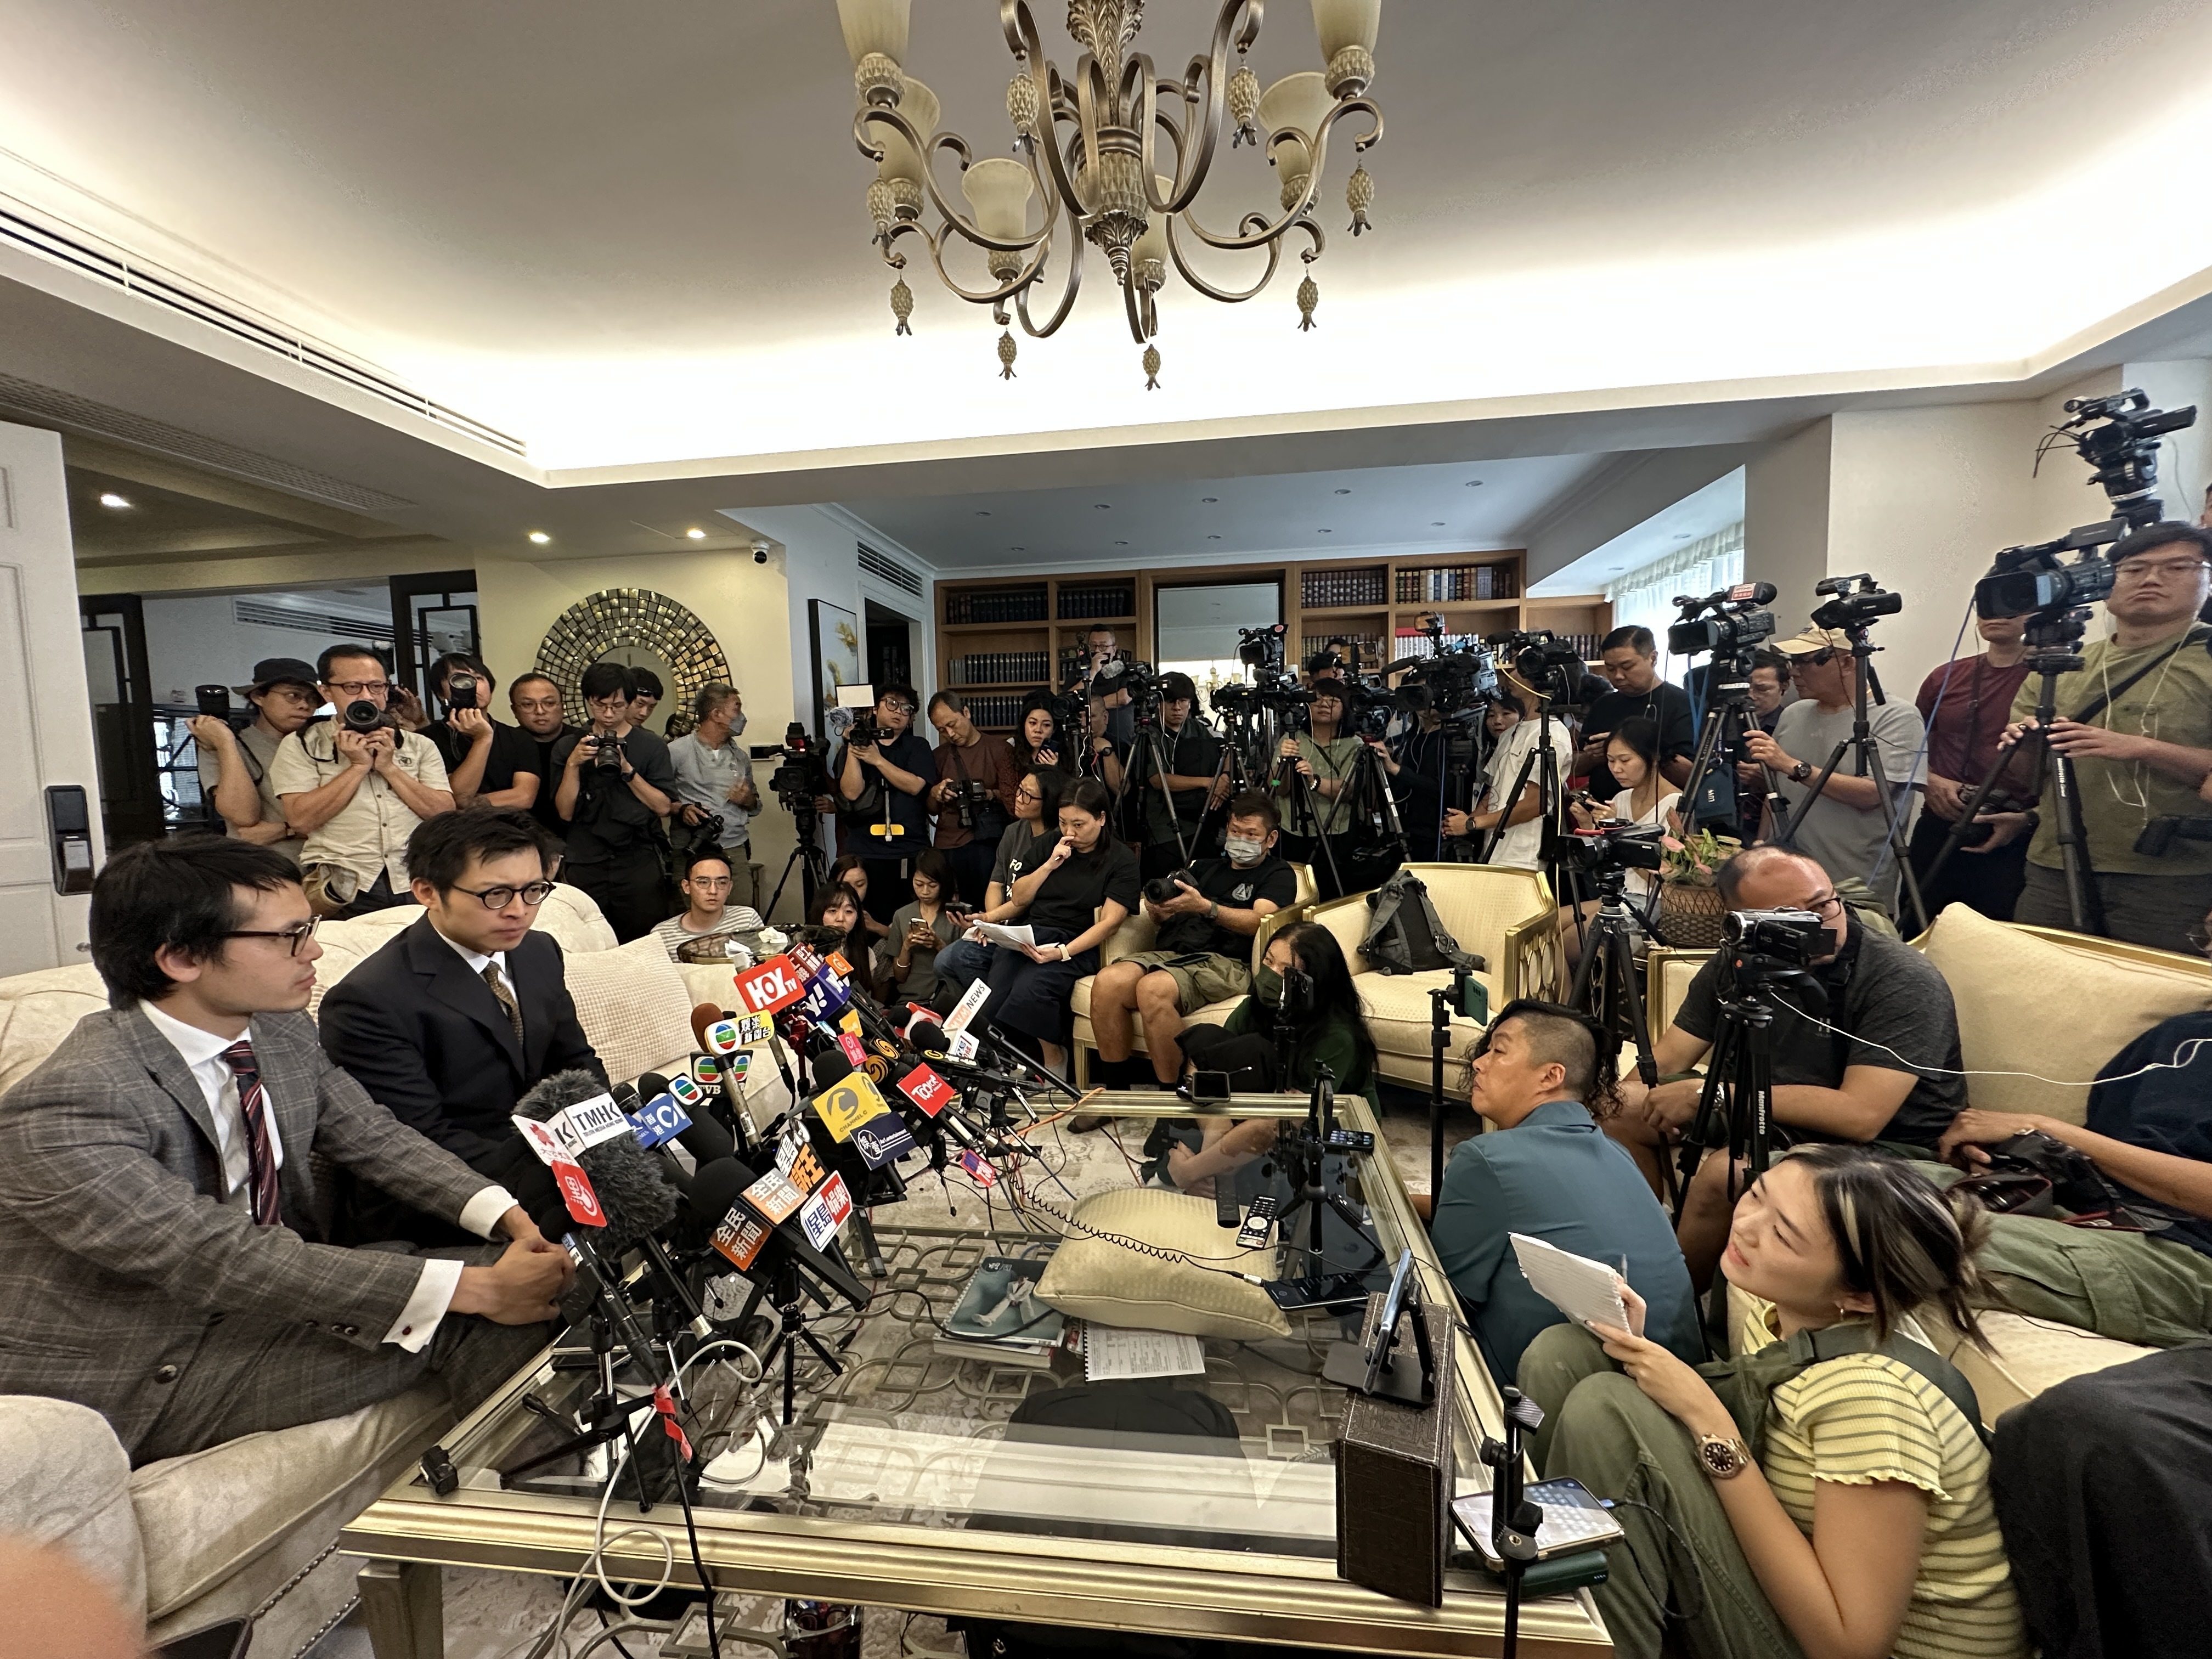 More than 100 journalists packed into the living room of the influencer’s Mid-Levels home. Photo: Jelly Tse